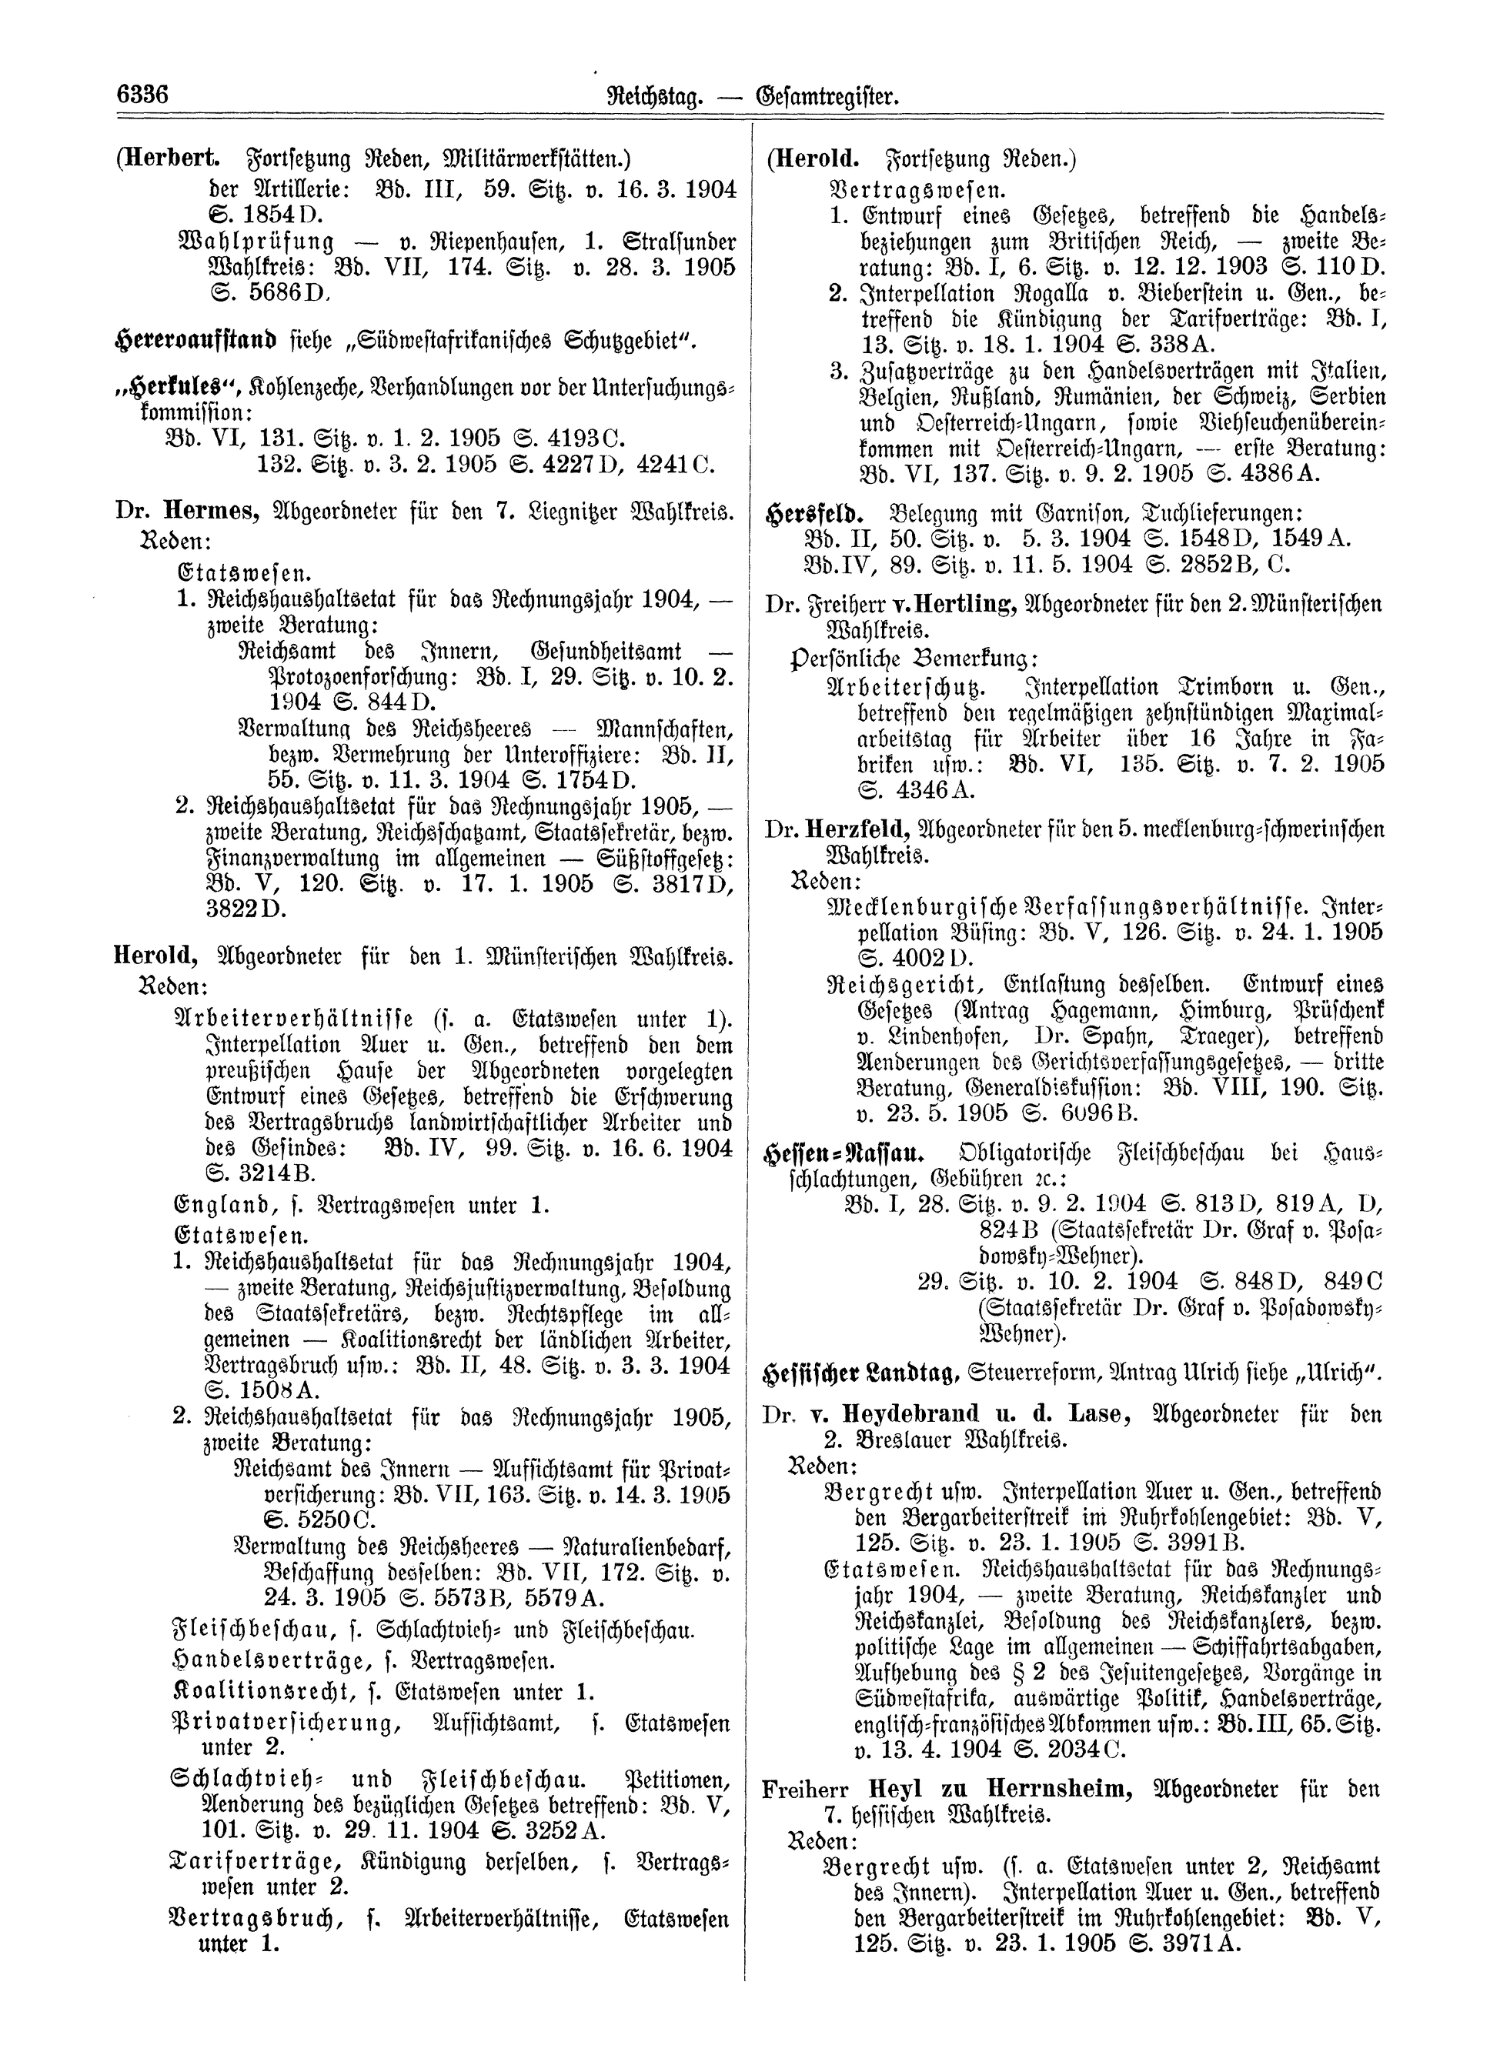 Scan of page 6336